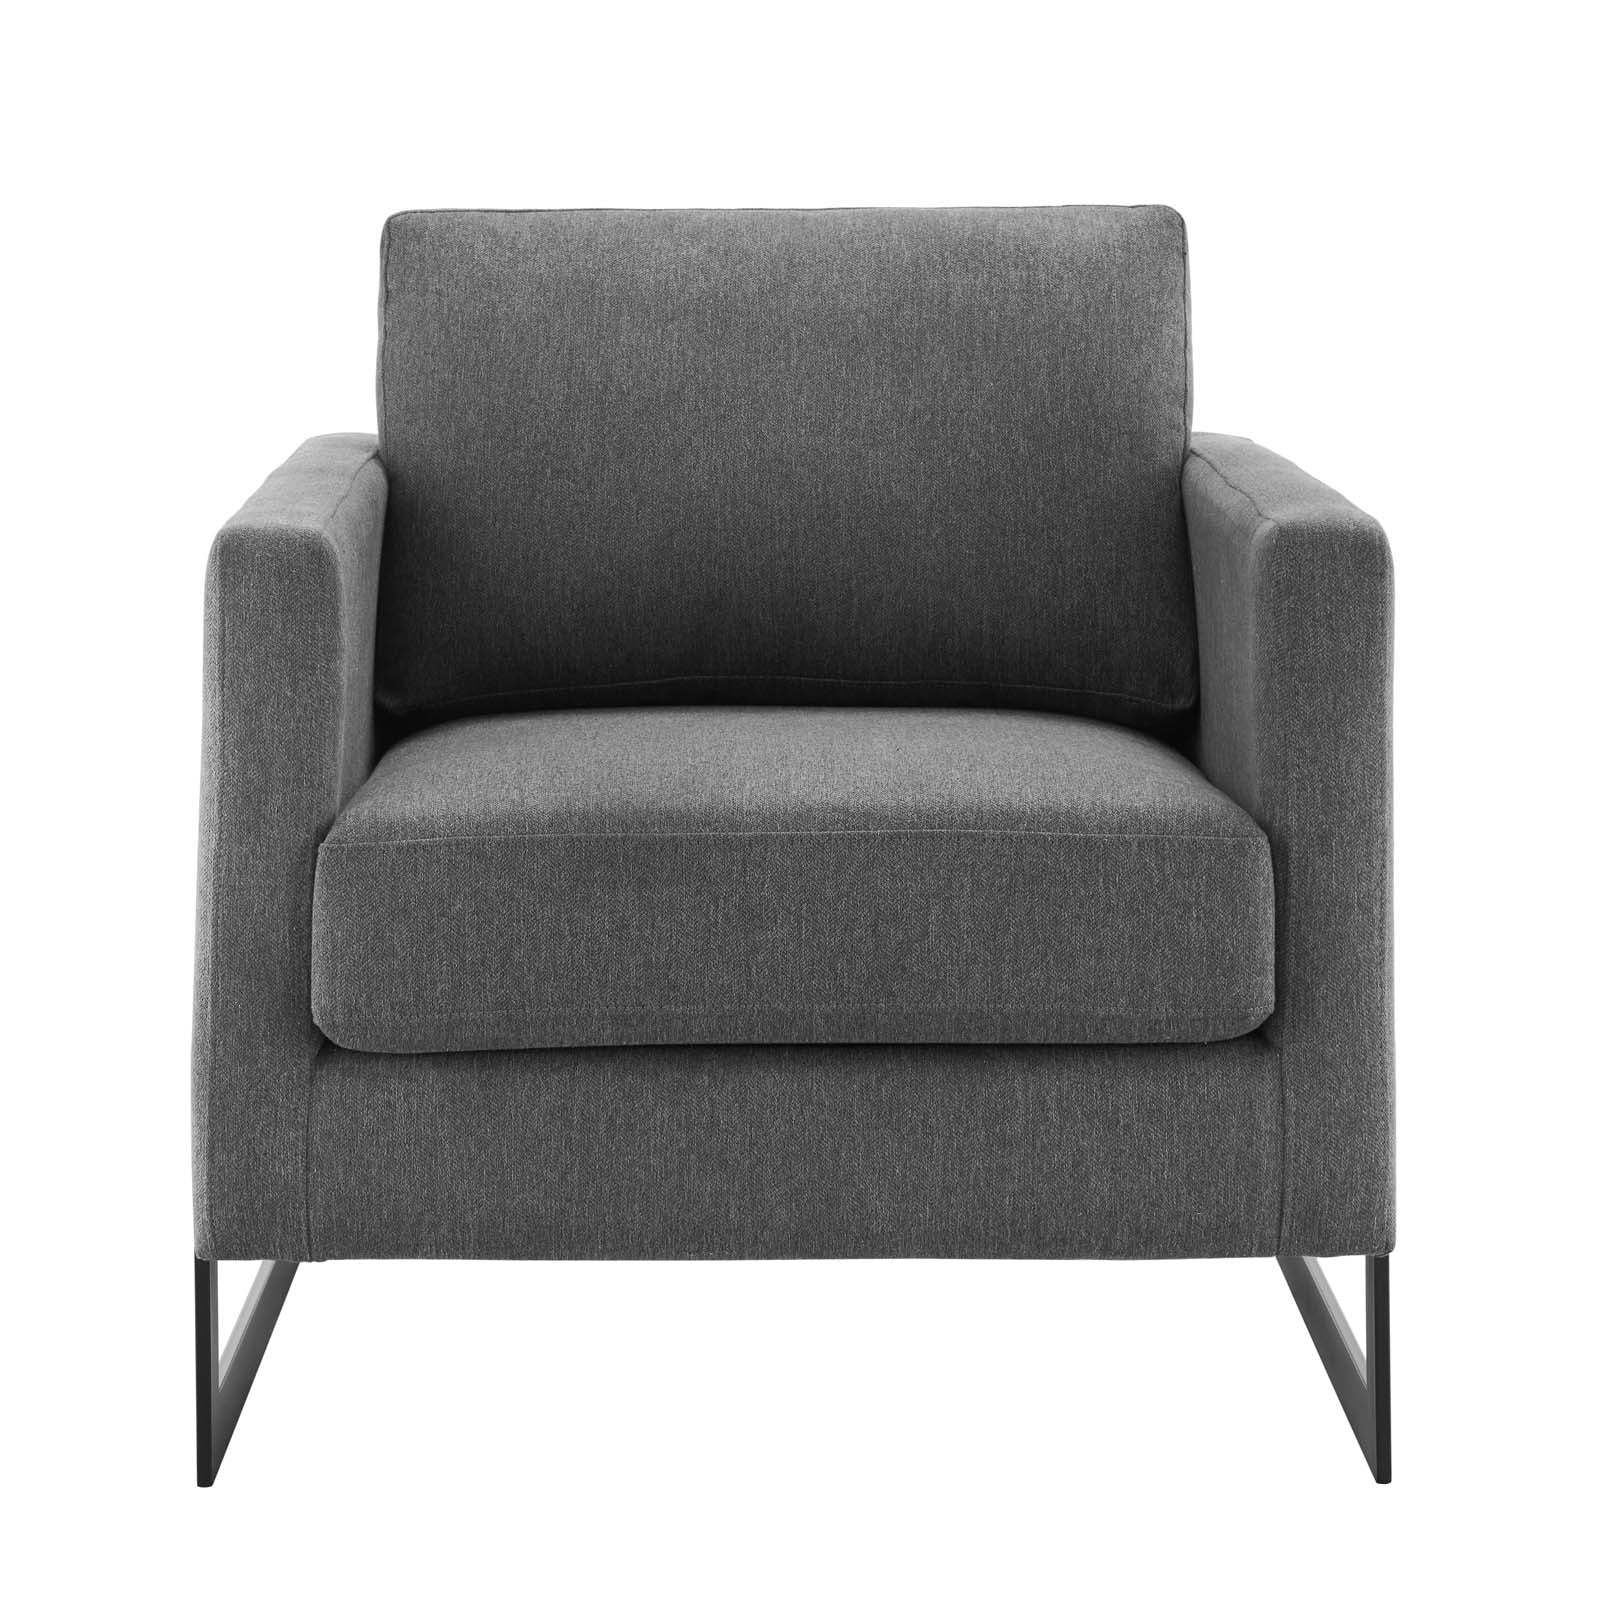 Modway Accent Chairs - Posse Upholstered Fabric Accent Chair Black Charcoal